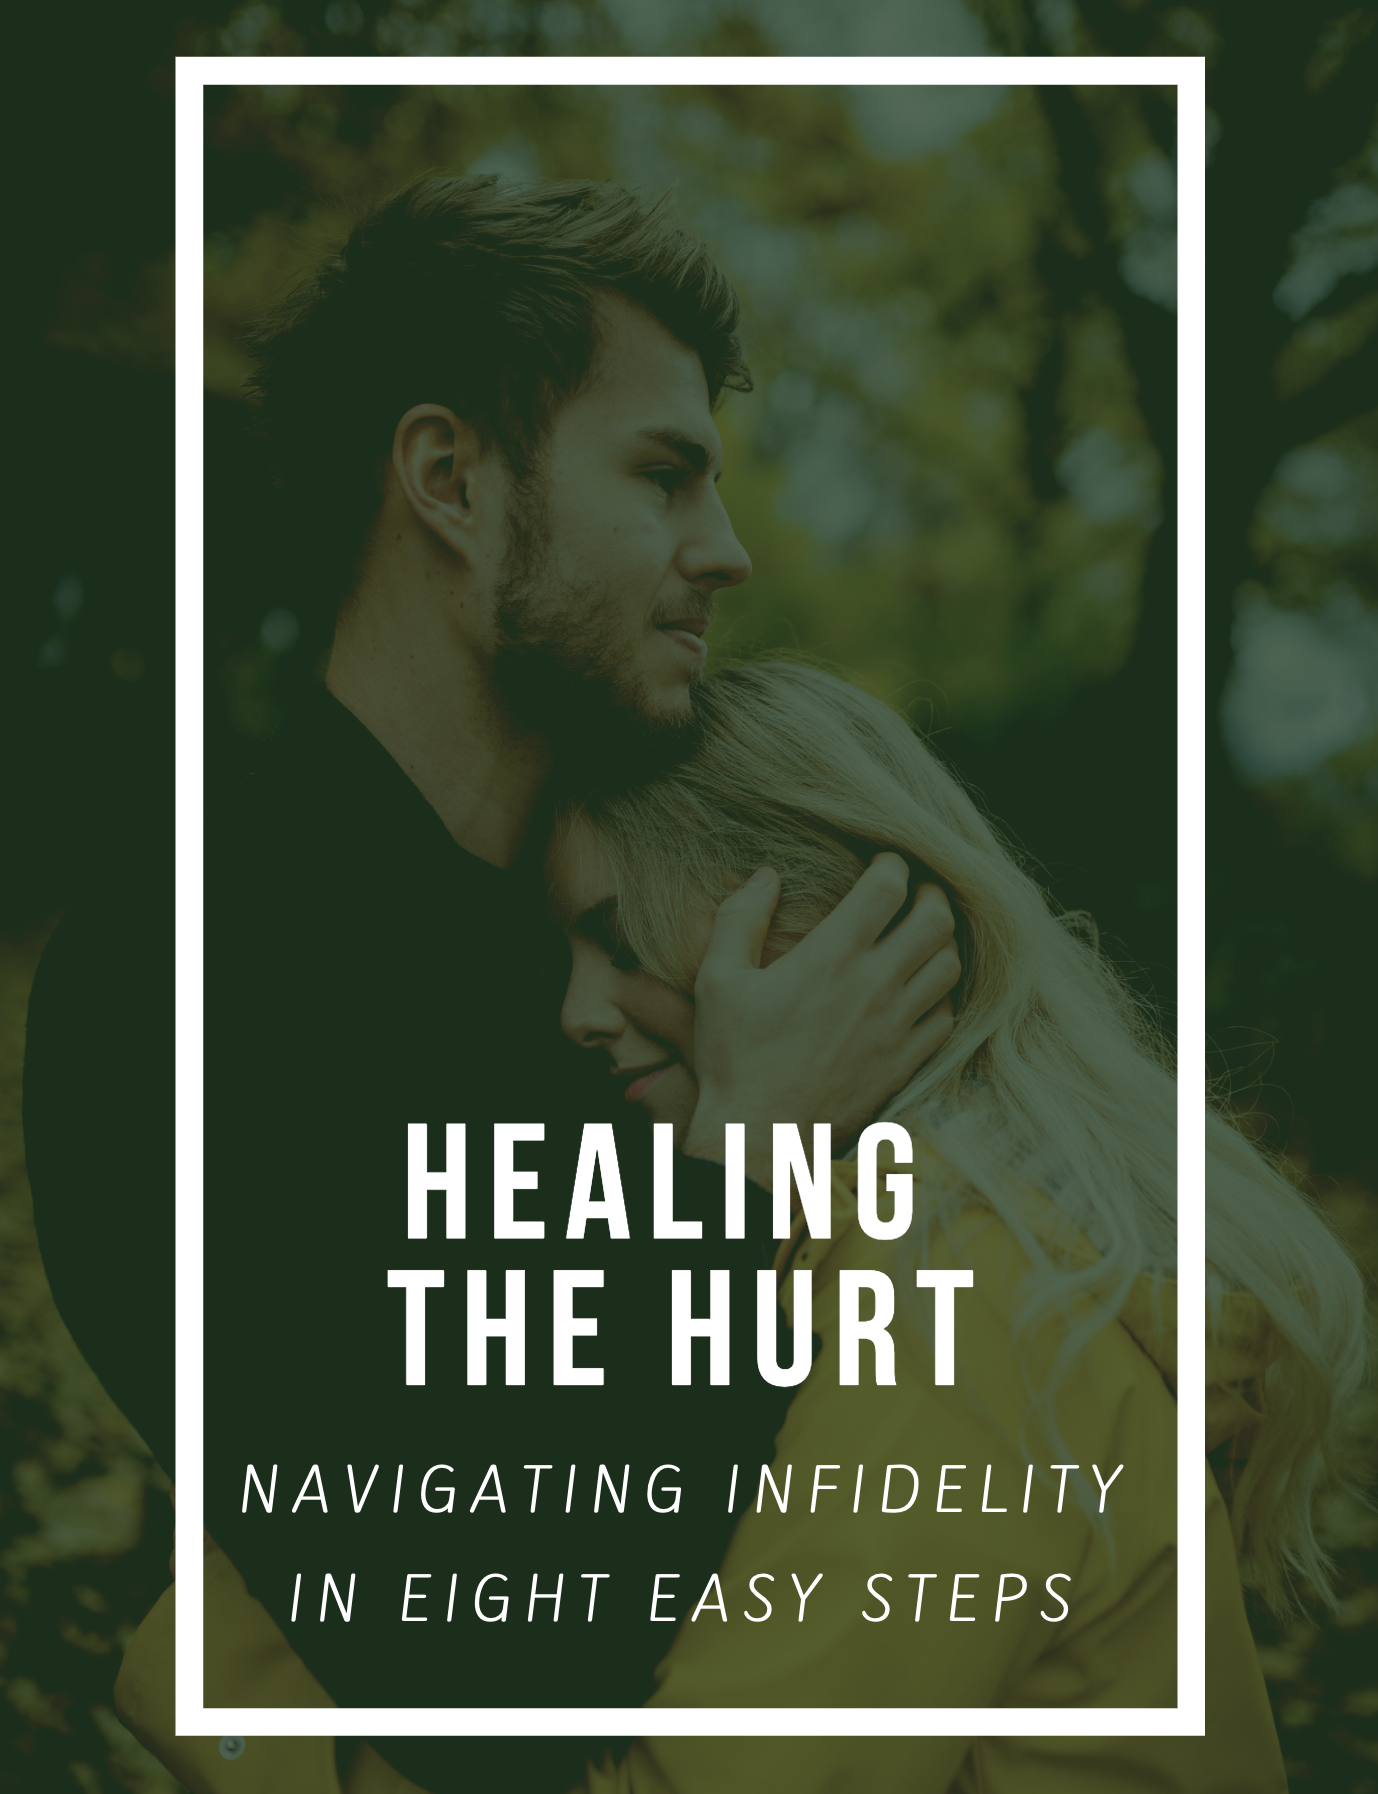 Healing the Hurt: Navigating Infidelity in Eight Easy Steps